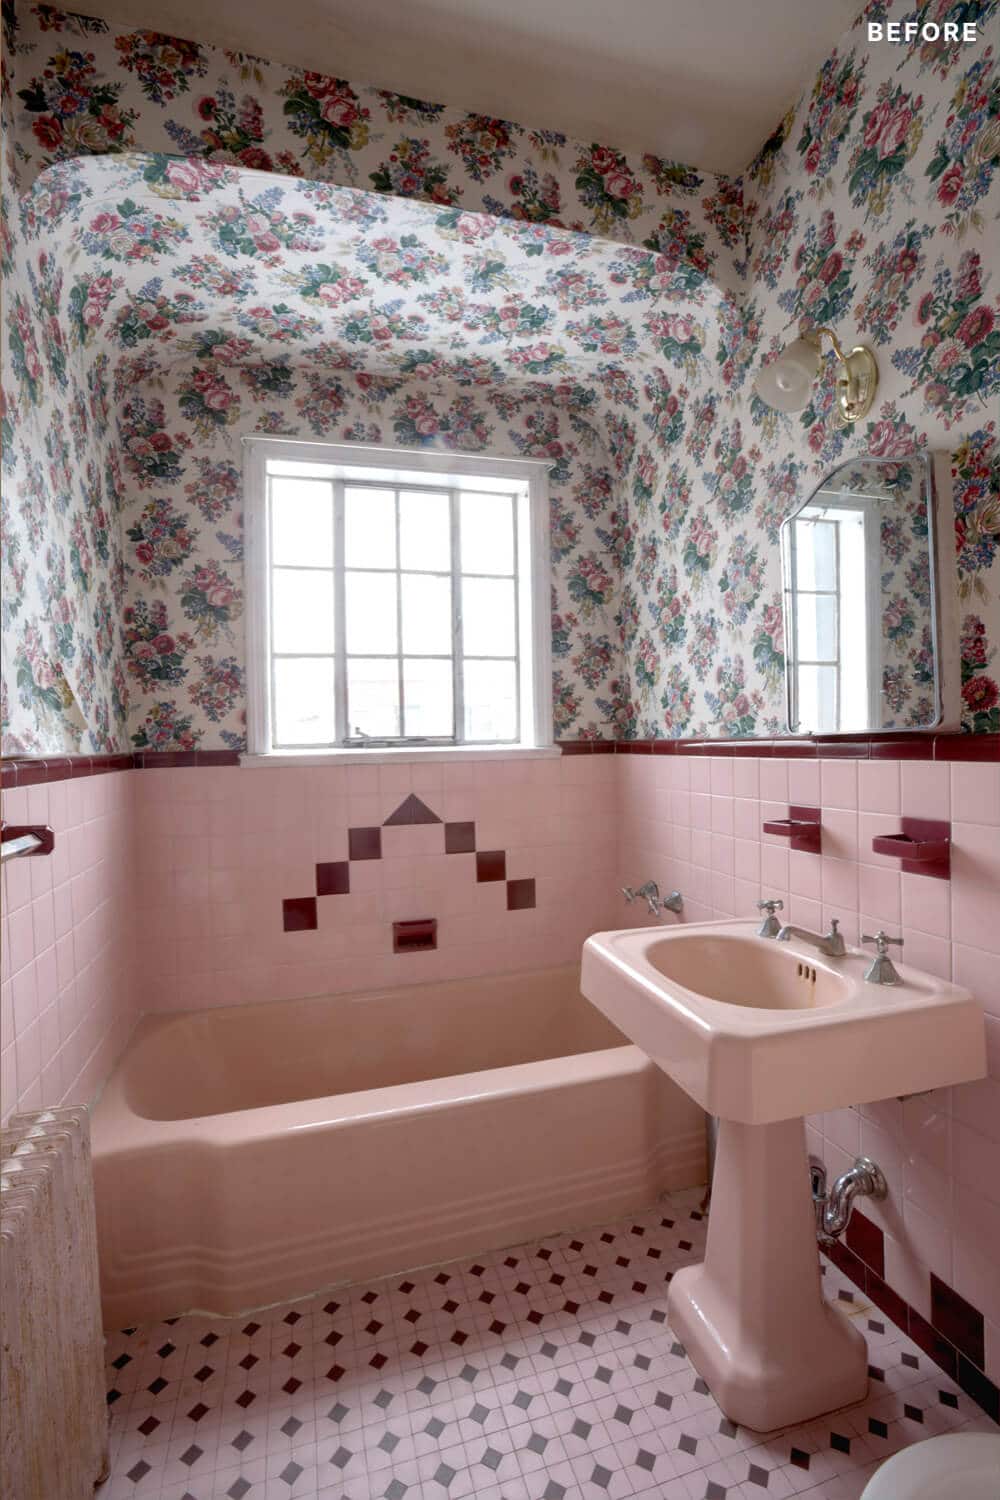 Pink bathroom with pedastal sink along with pink bathtub and floral wallpaper before renovation